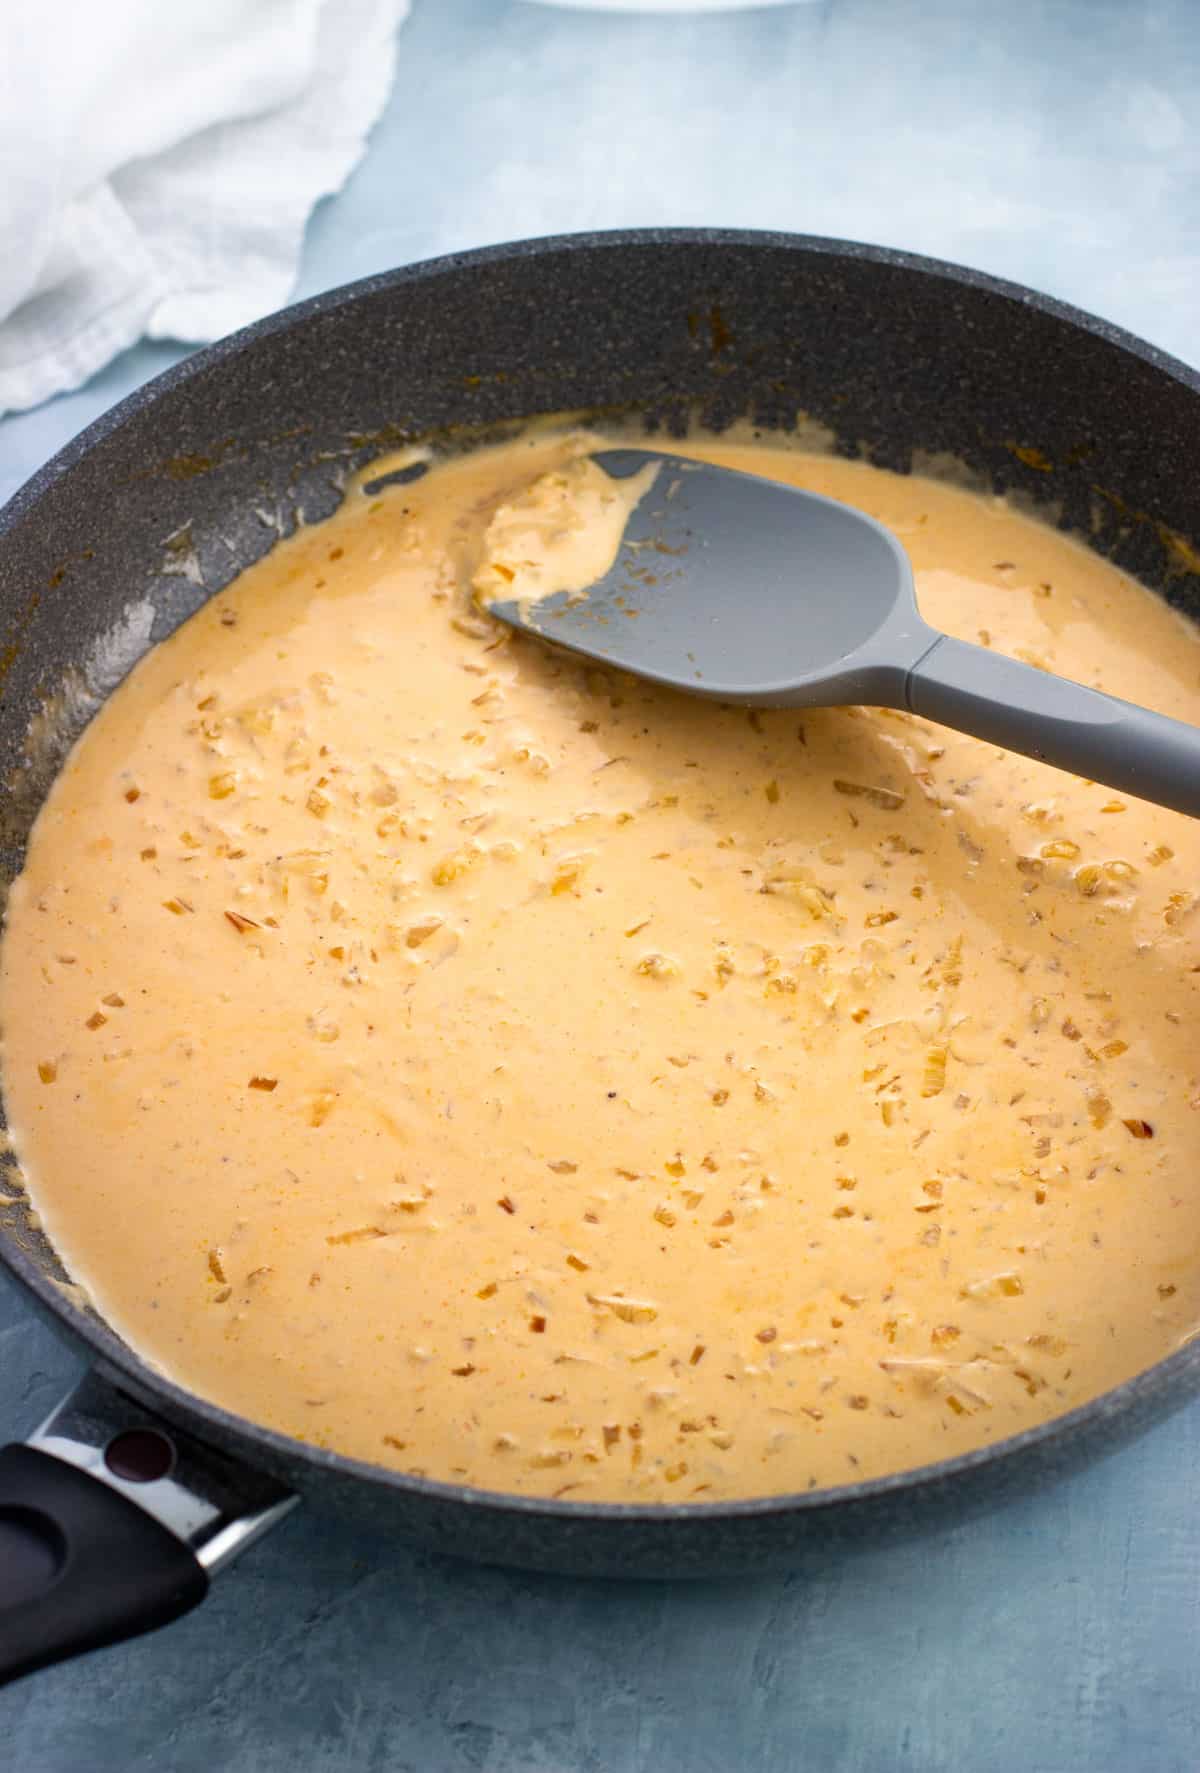 Cream poured into the pan to form the lobster ravioli sauce.